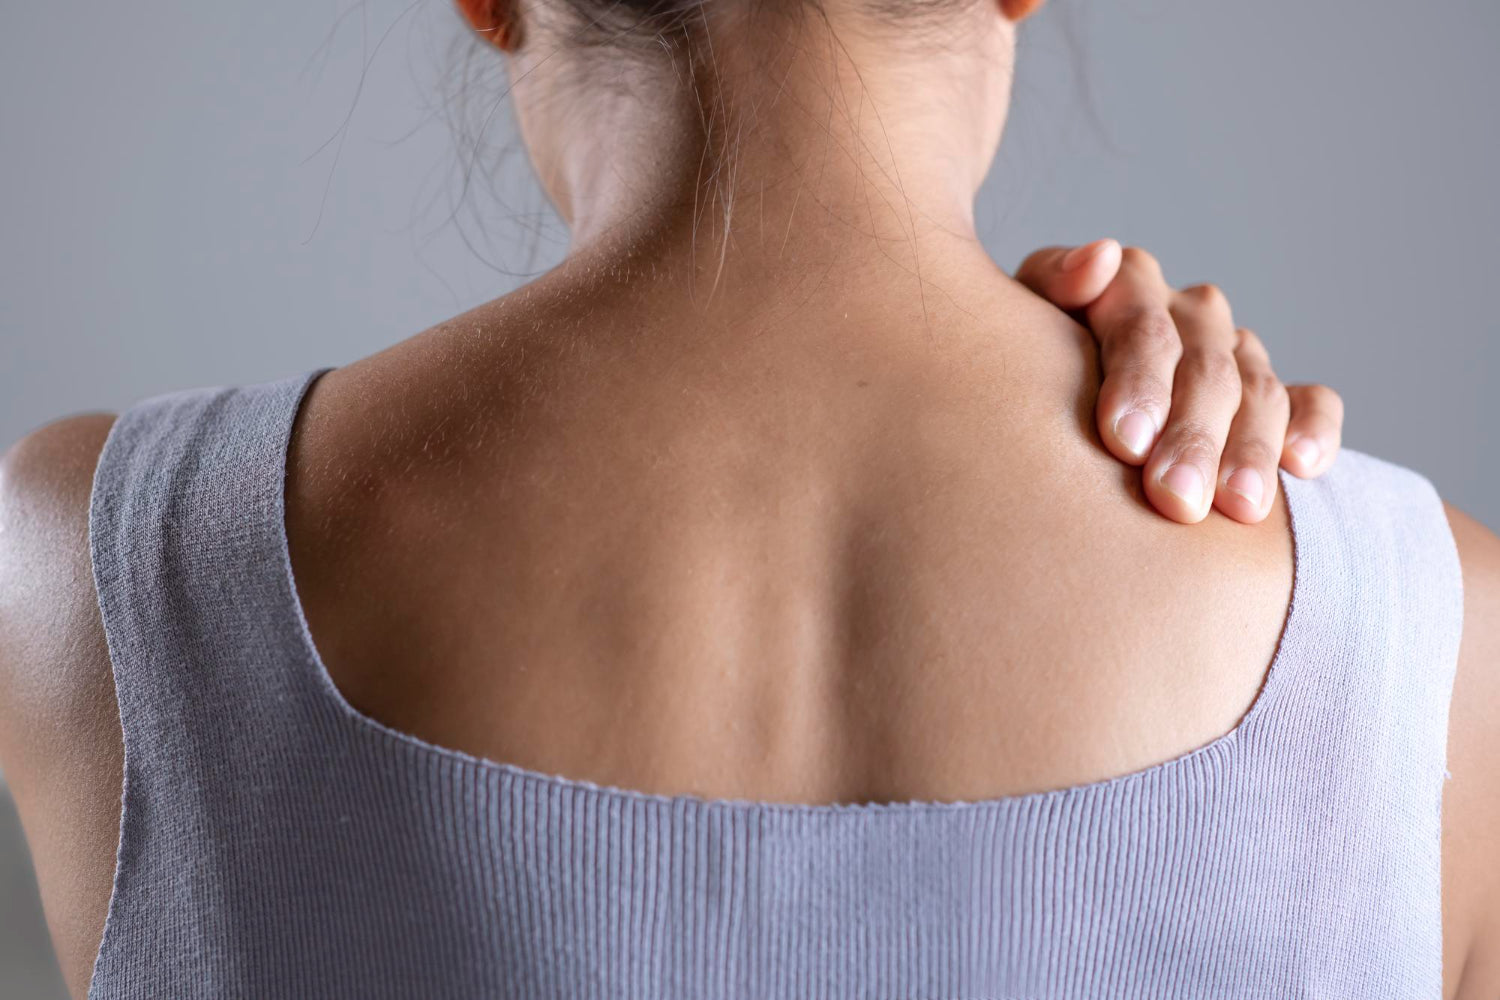 how to cure neck pain fast